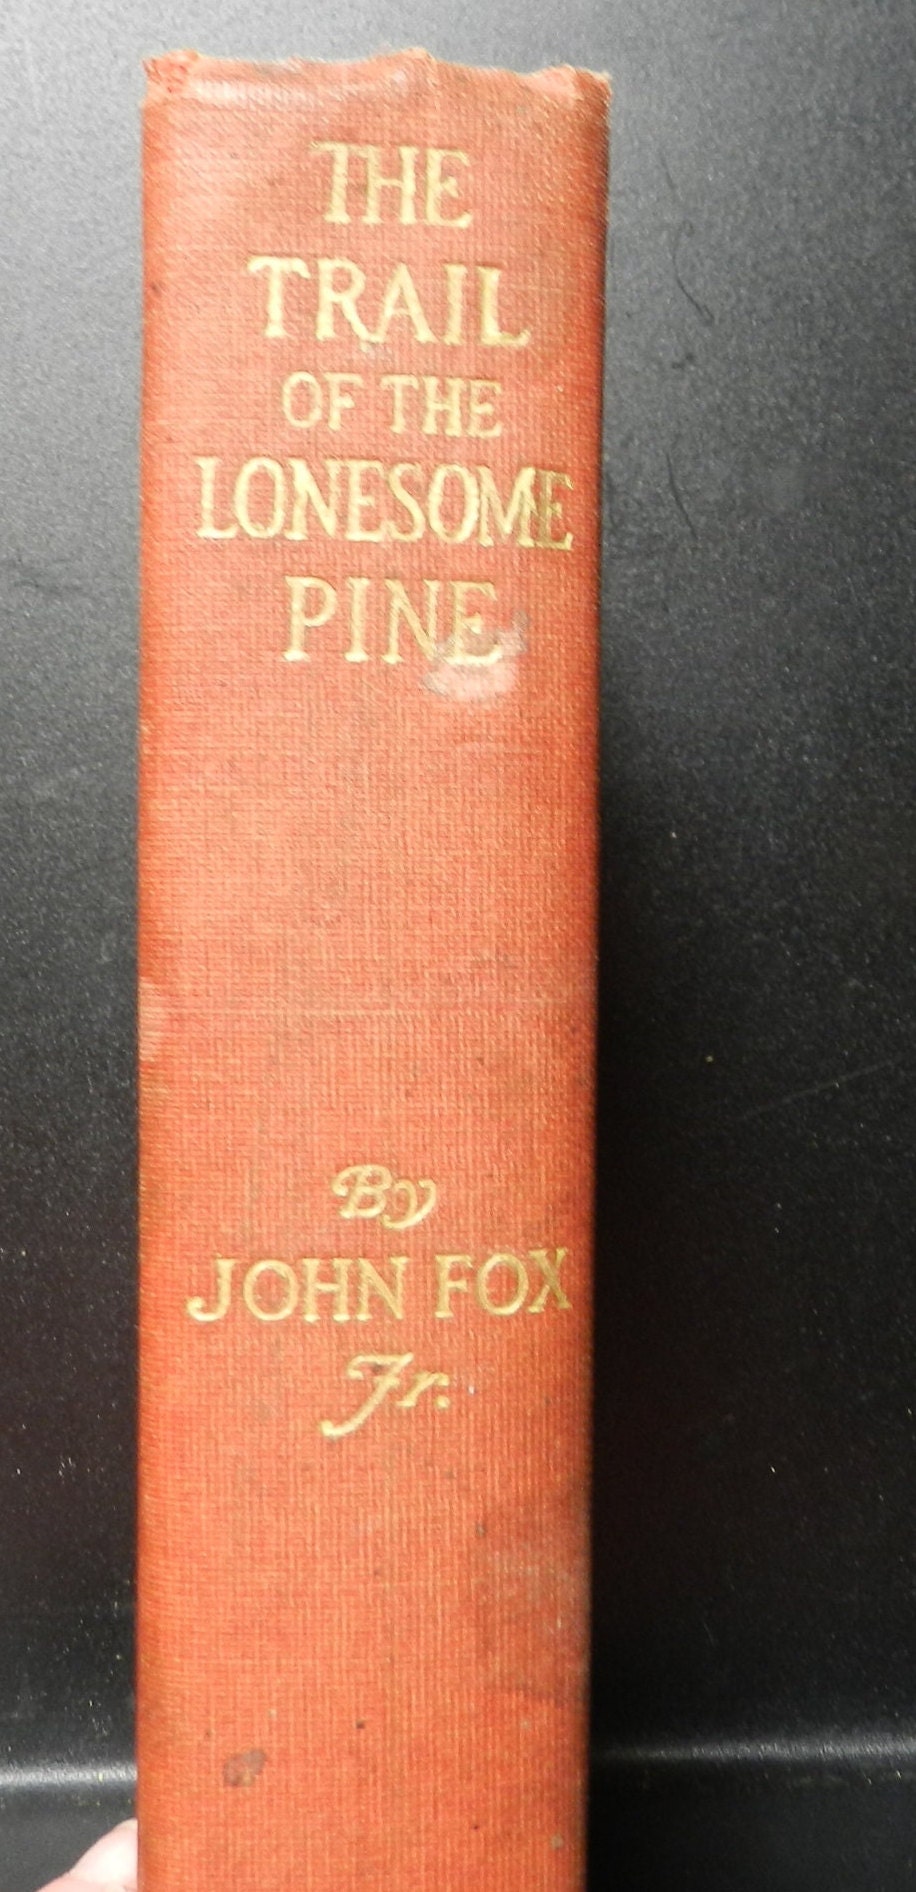 Antique American Classic "Trail of the Lonesome Pine" by Fox,  1st Edition,  Red and Gilt 1908